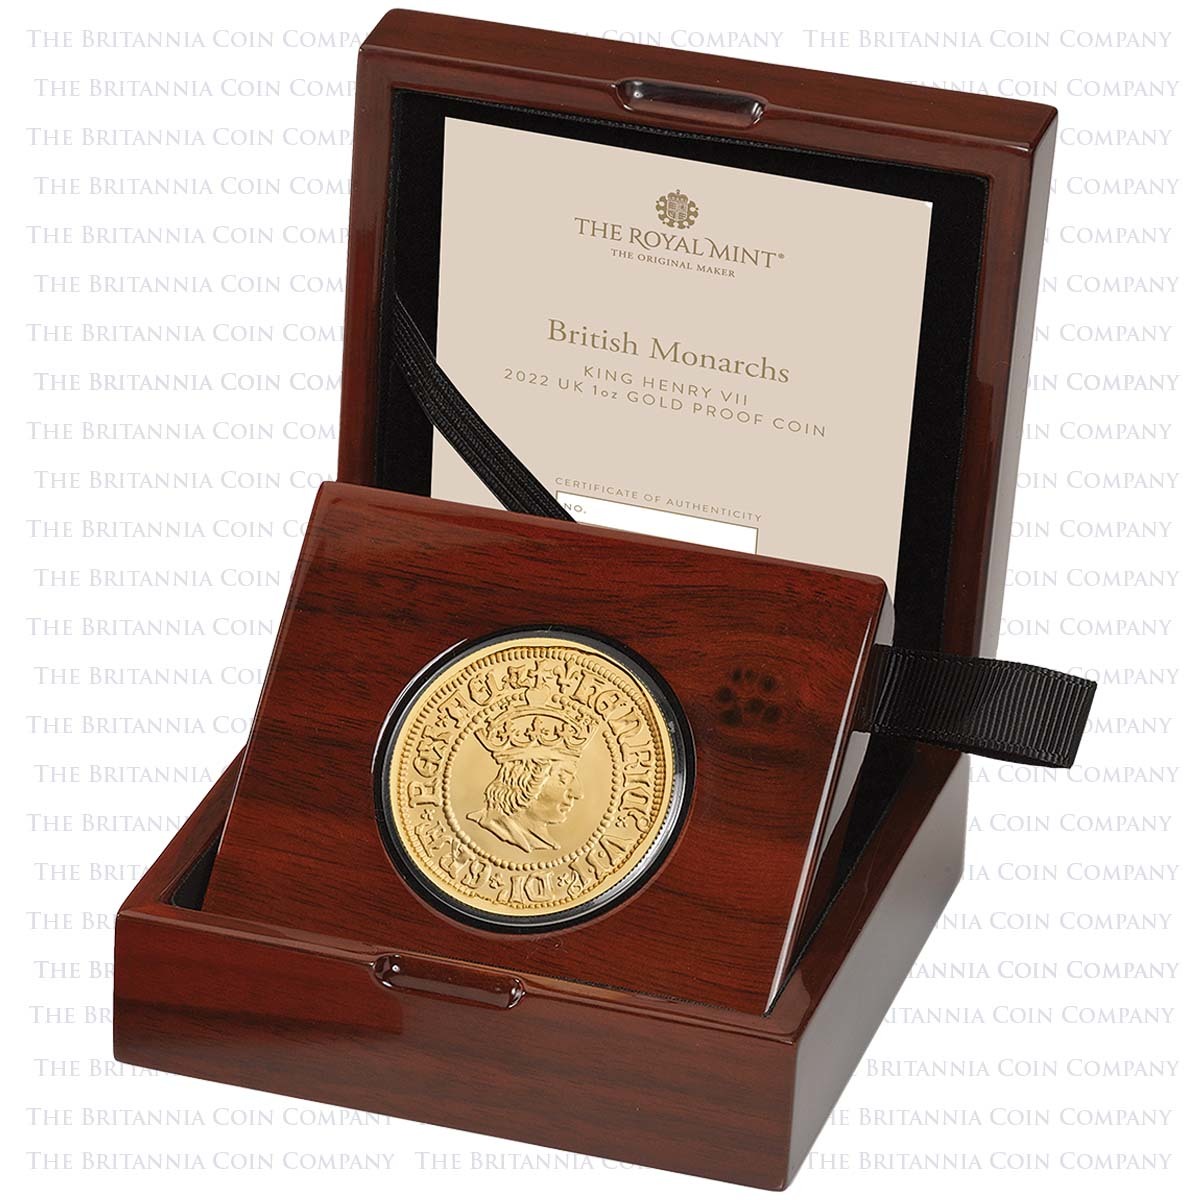 UK22H7S10 2022 British Monarchs Henry VII 1 Ounce Gold Proof Boxed